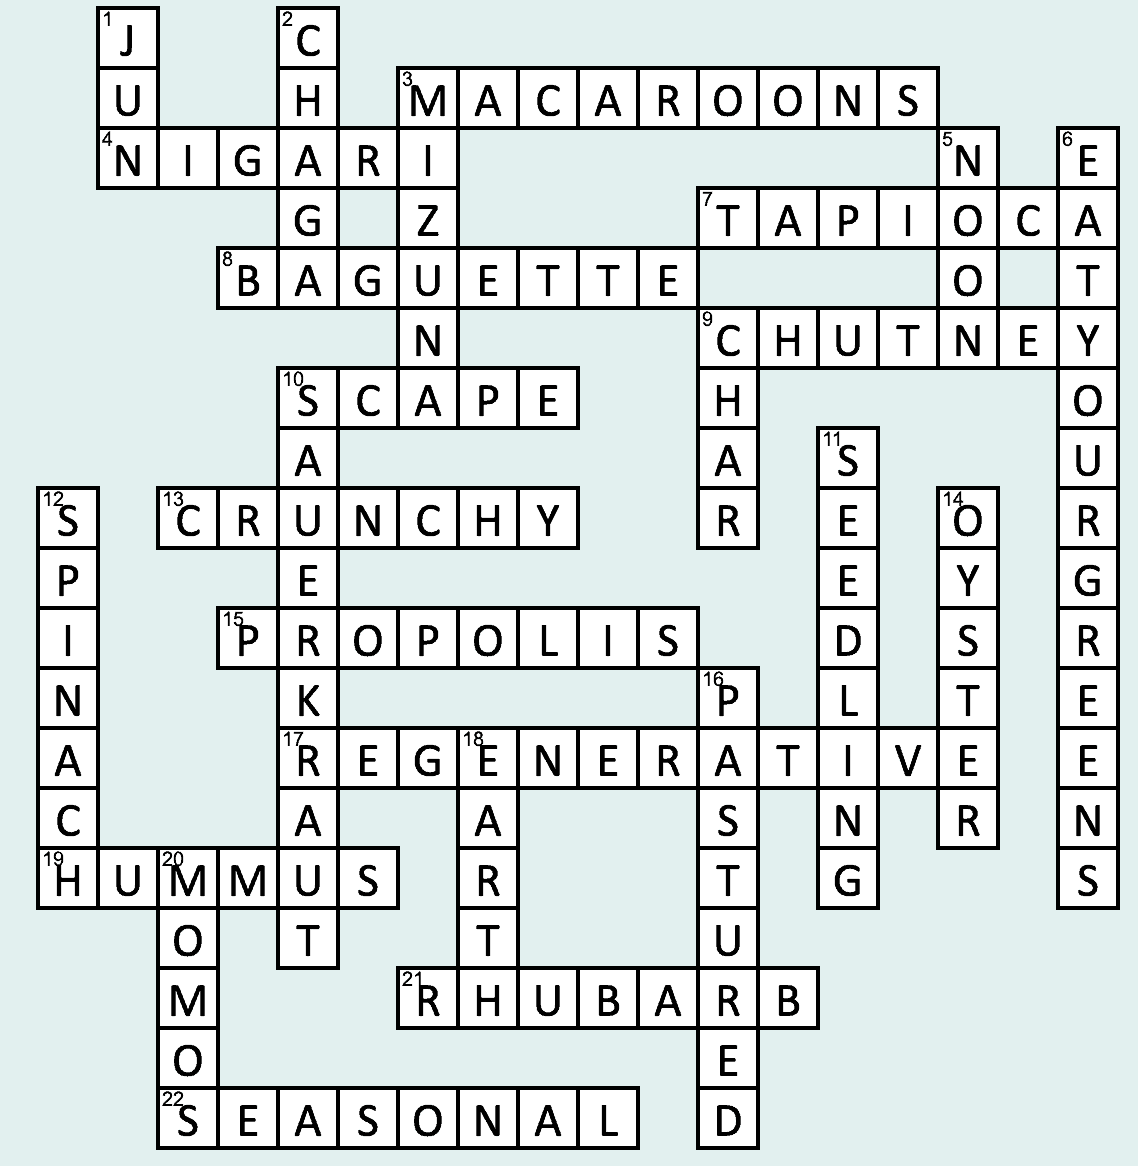 Answers to our crossword puzzle. Please let us know if we can make the crossword more accessible to you